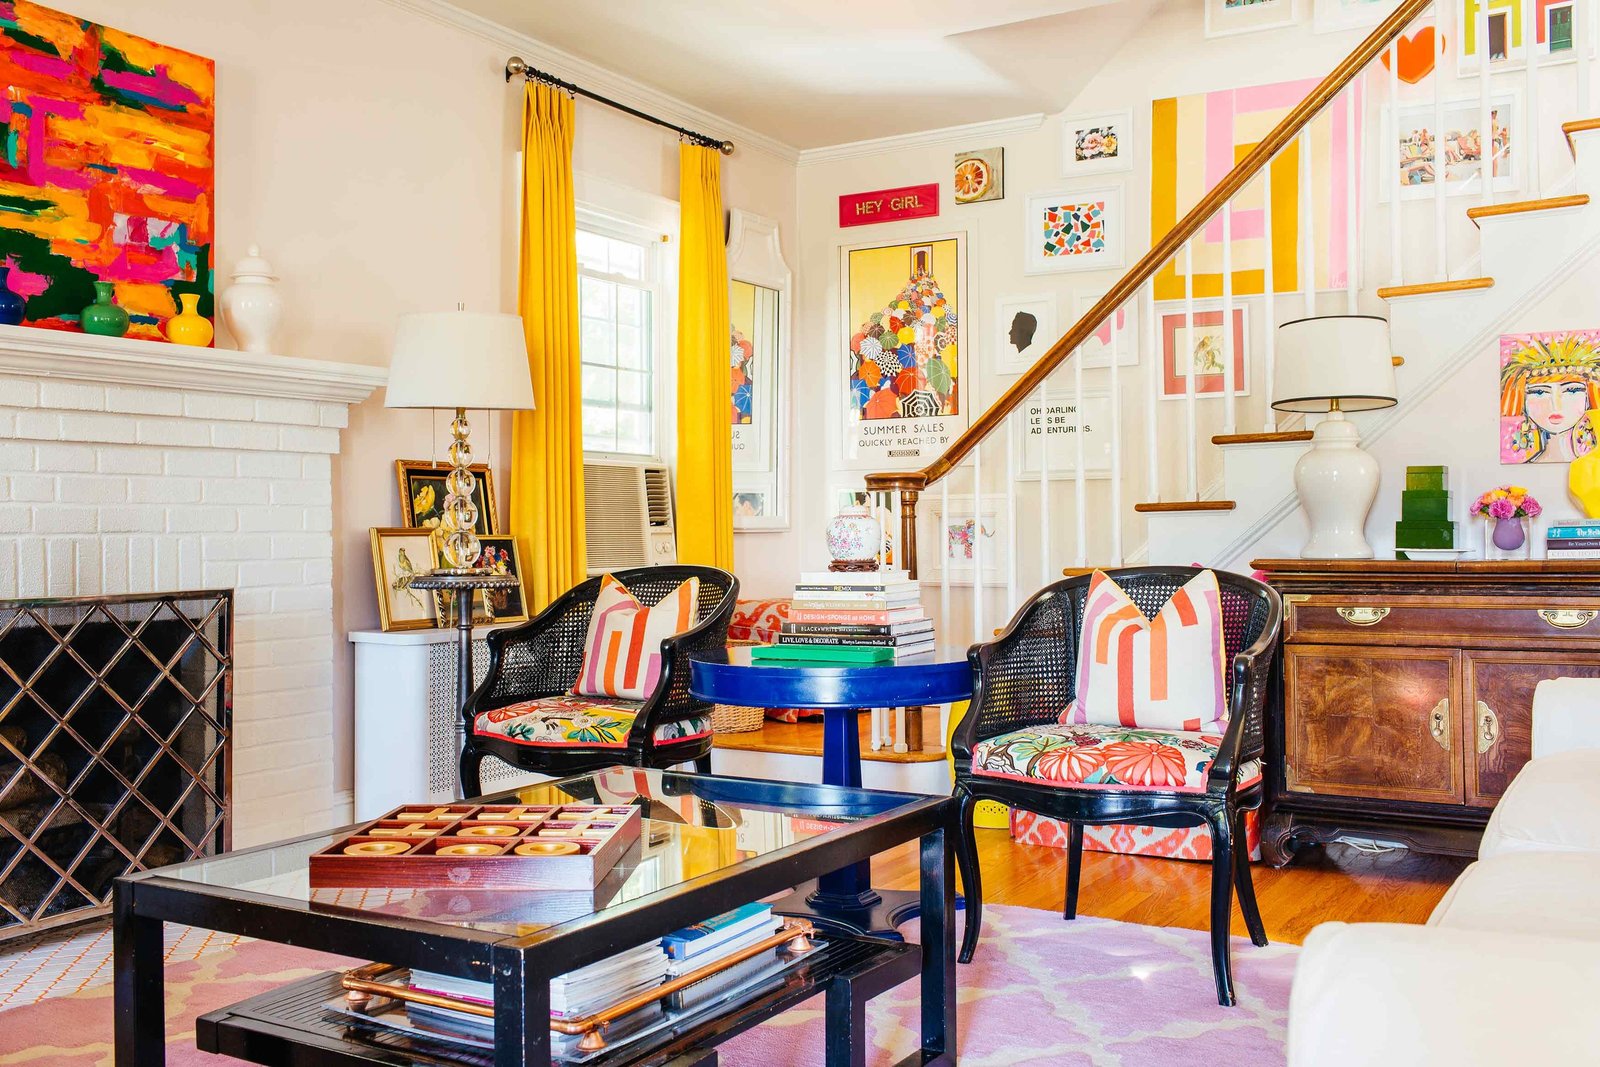 A bright and colorful living room with a white fireplace and staircase.